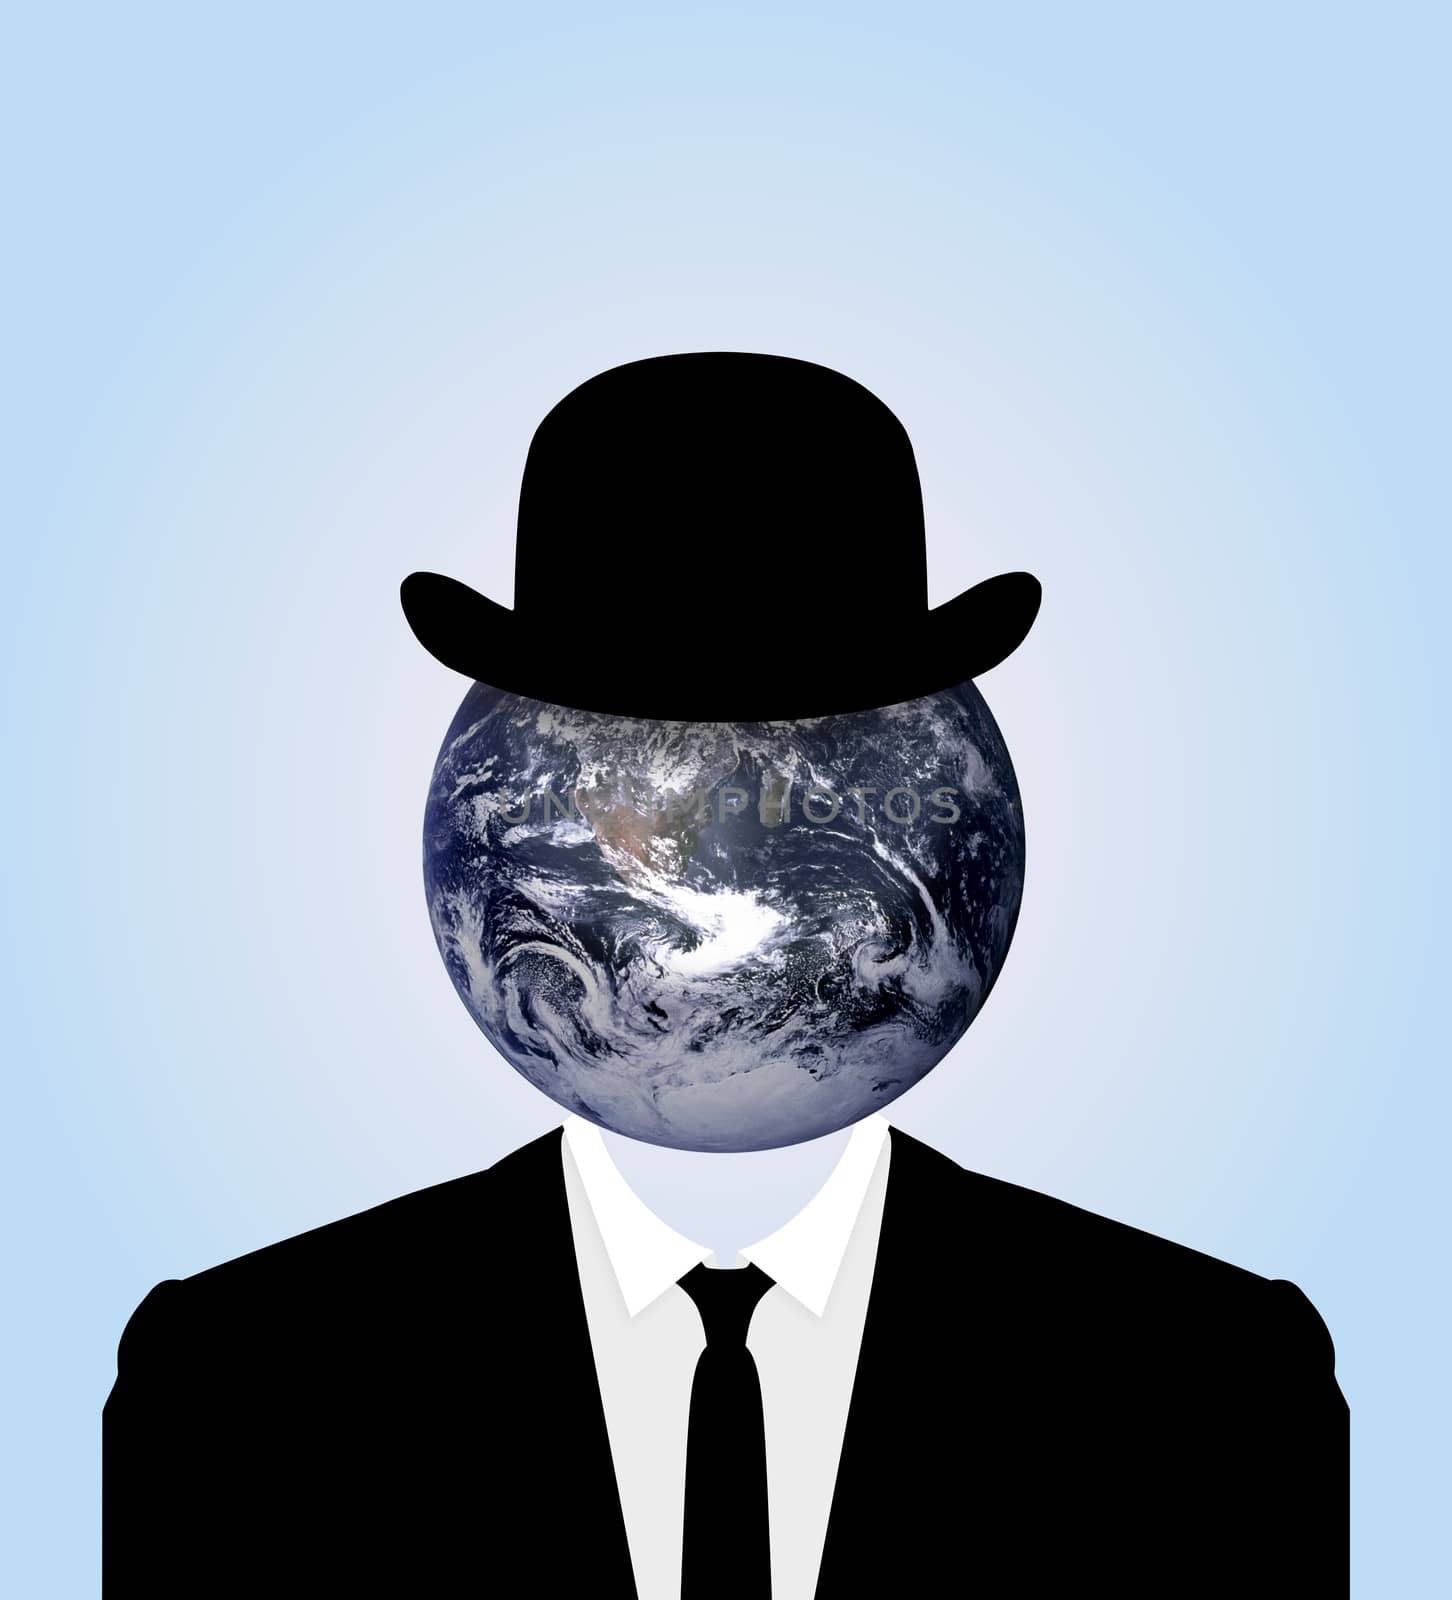 Illustration of a Business person with a bowler hat, suit and the Earth for a head